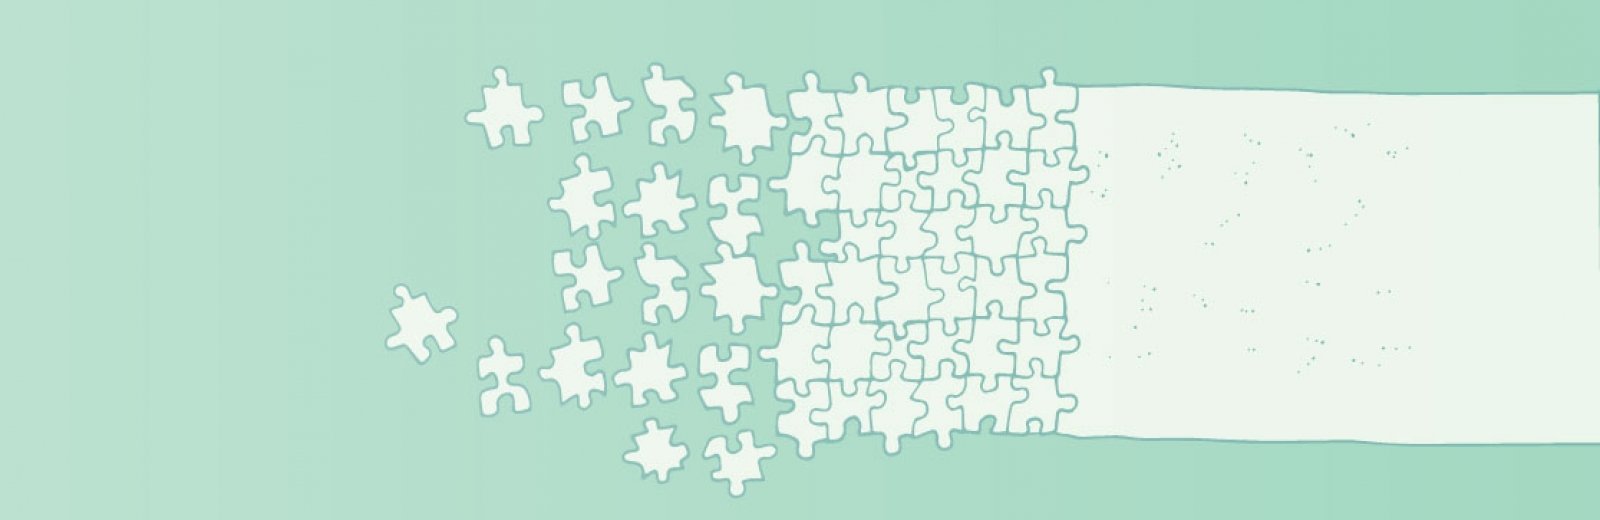 An illustration of puzzle pieces coming together to form a cohesive whole.